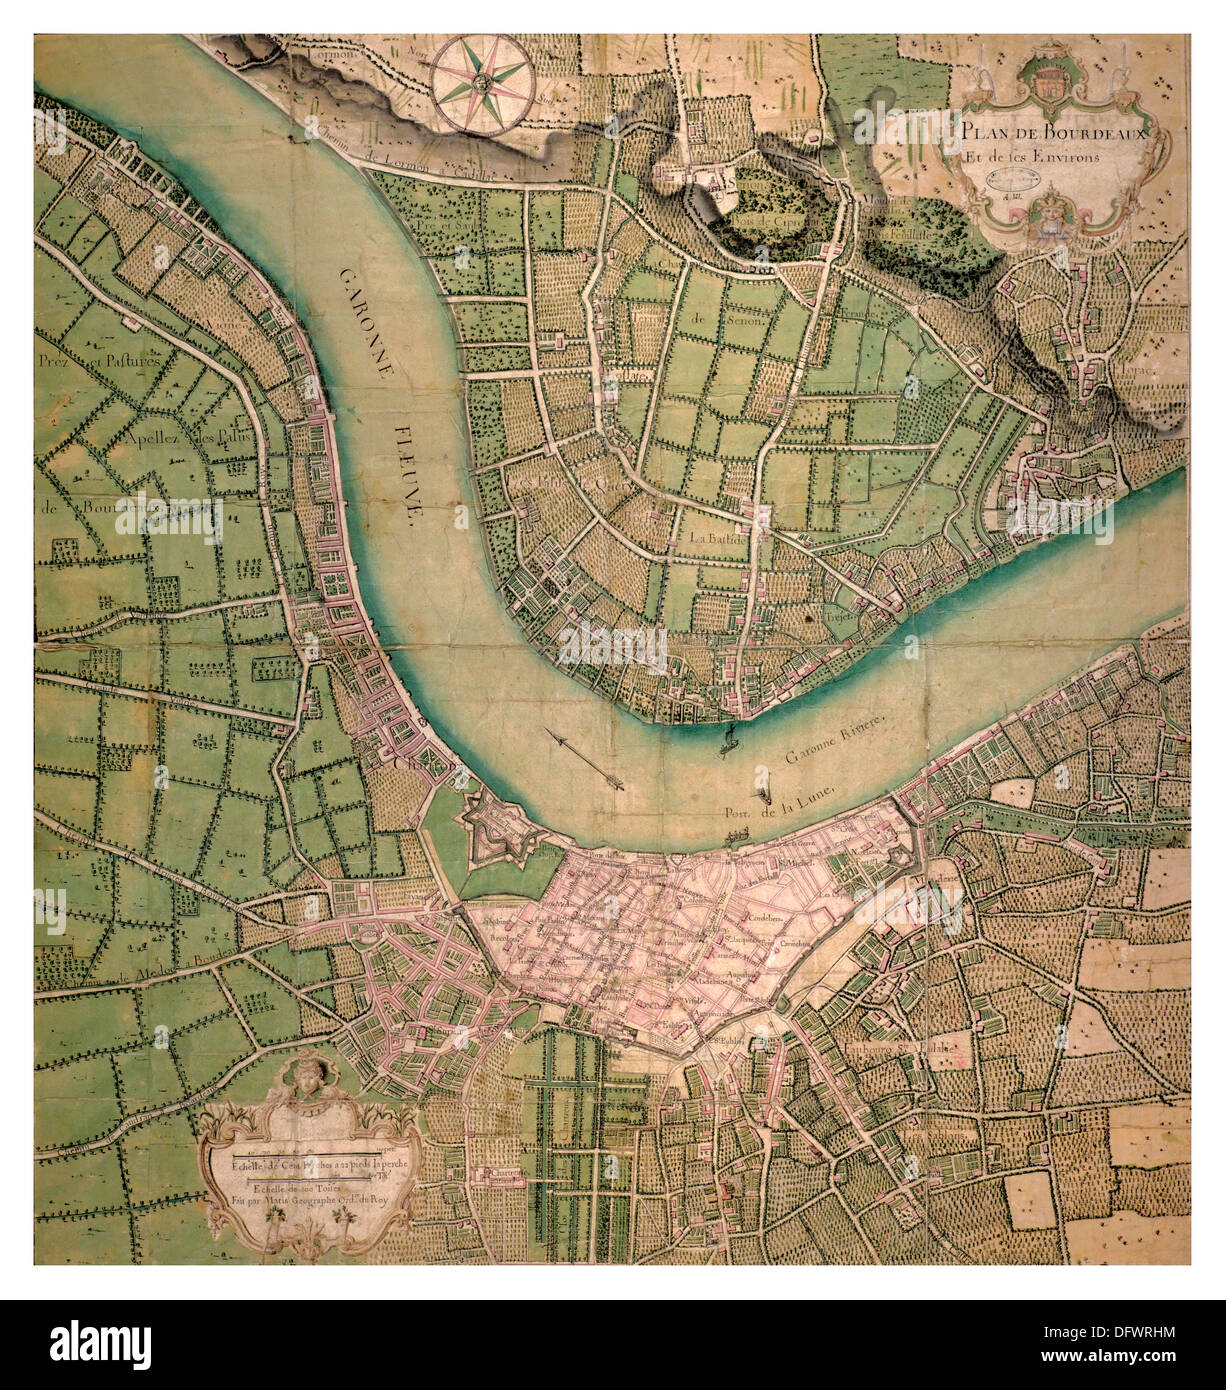 1700's Plan de Bordeaux and environs including The River Garonne and vineyards by artist Hippolyte Matis Stock Photo